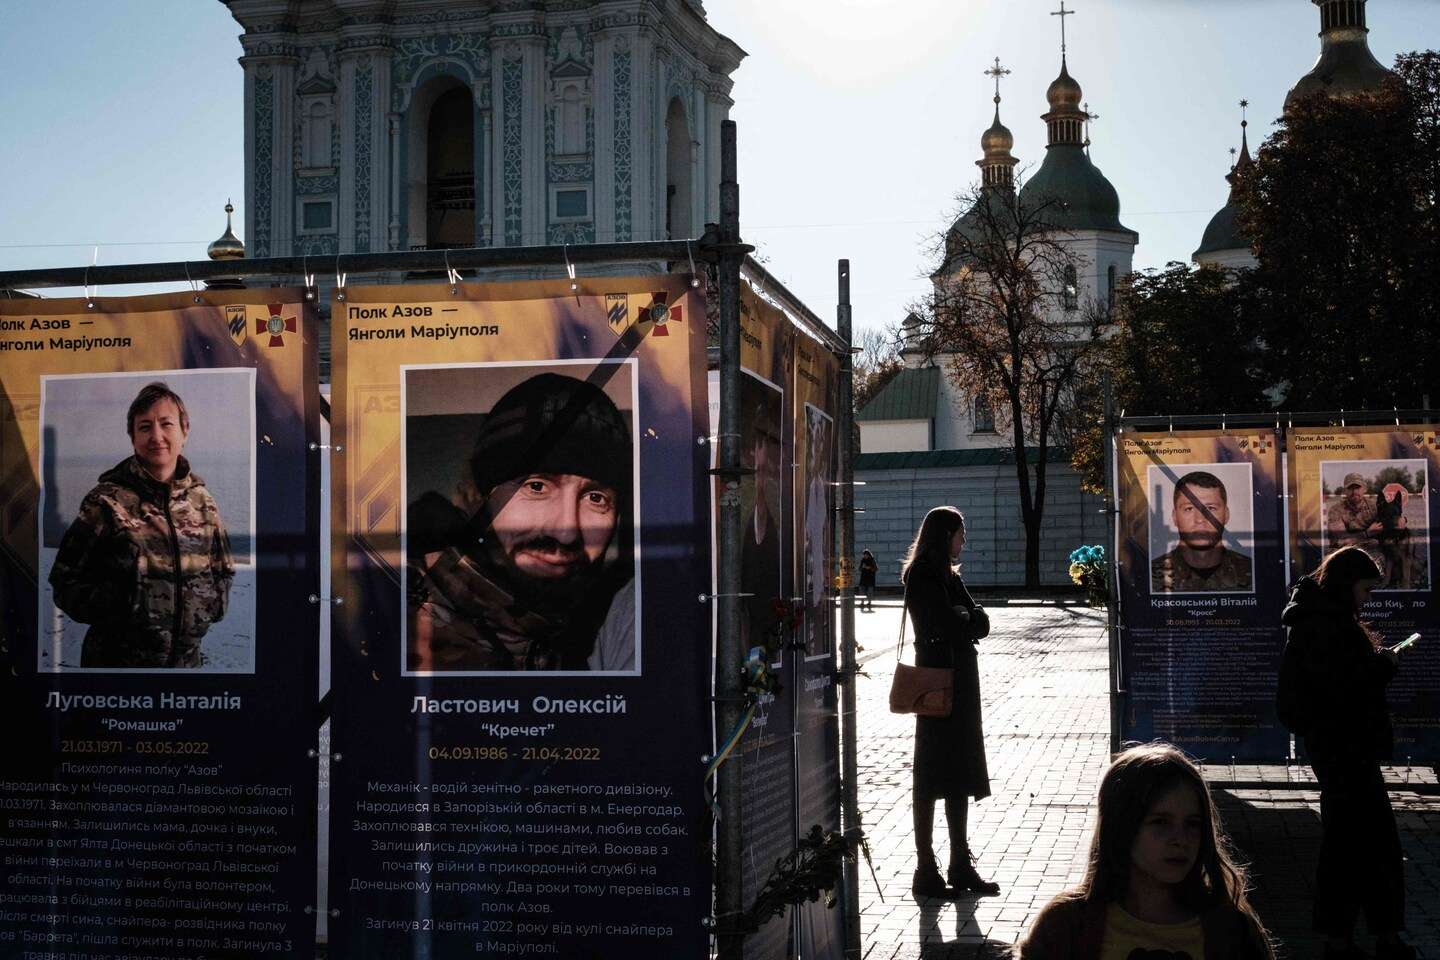 Most Ukrainians want to keep fighting until Russia is driven out, poll finds